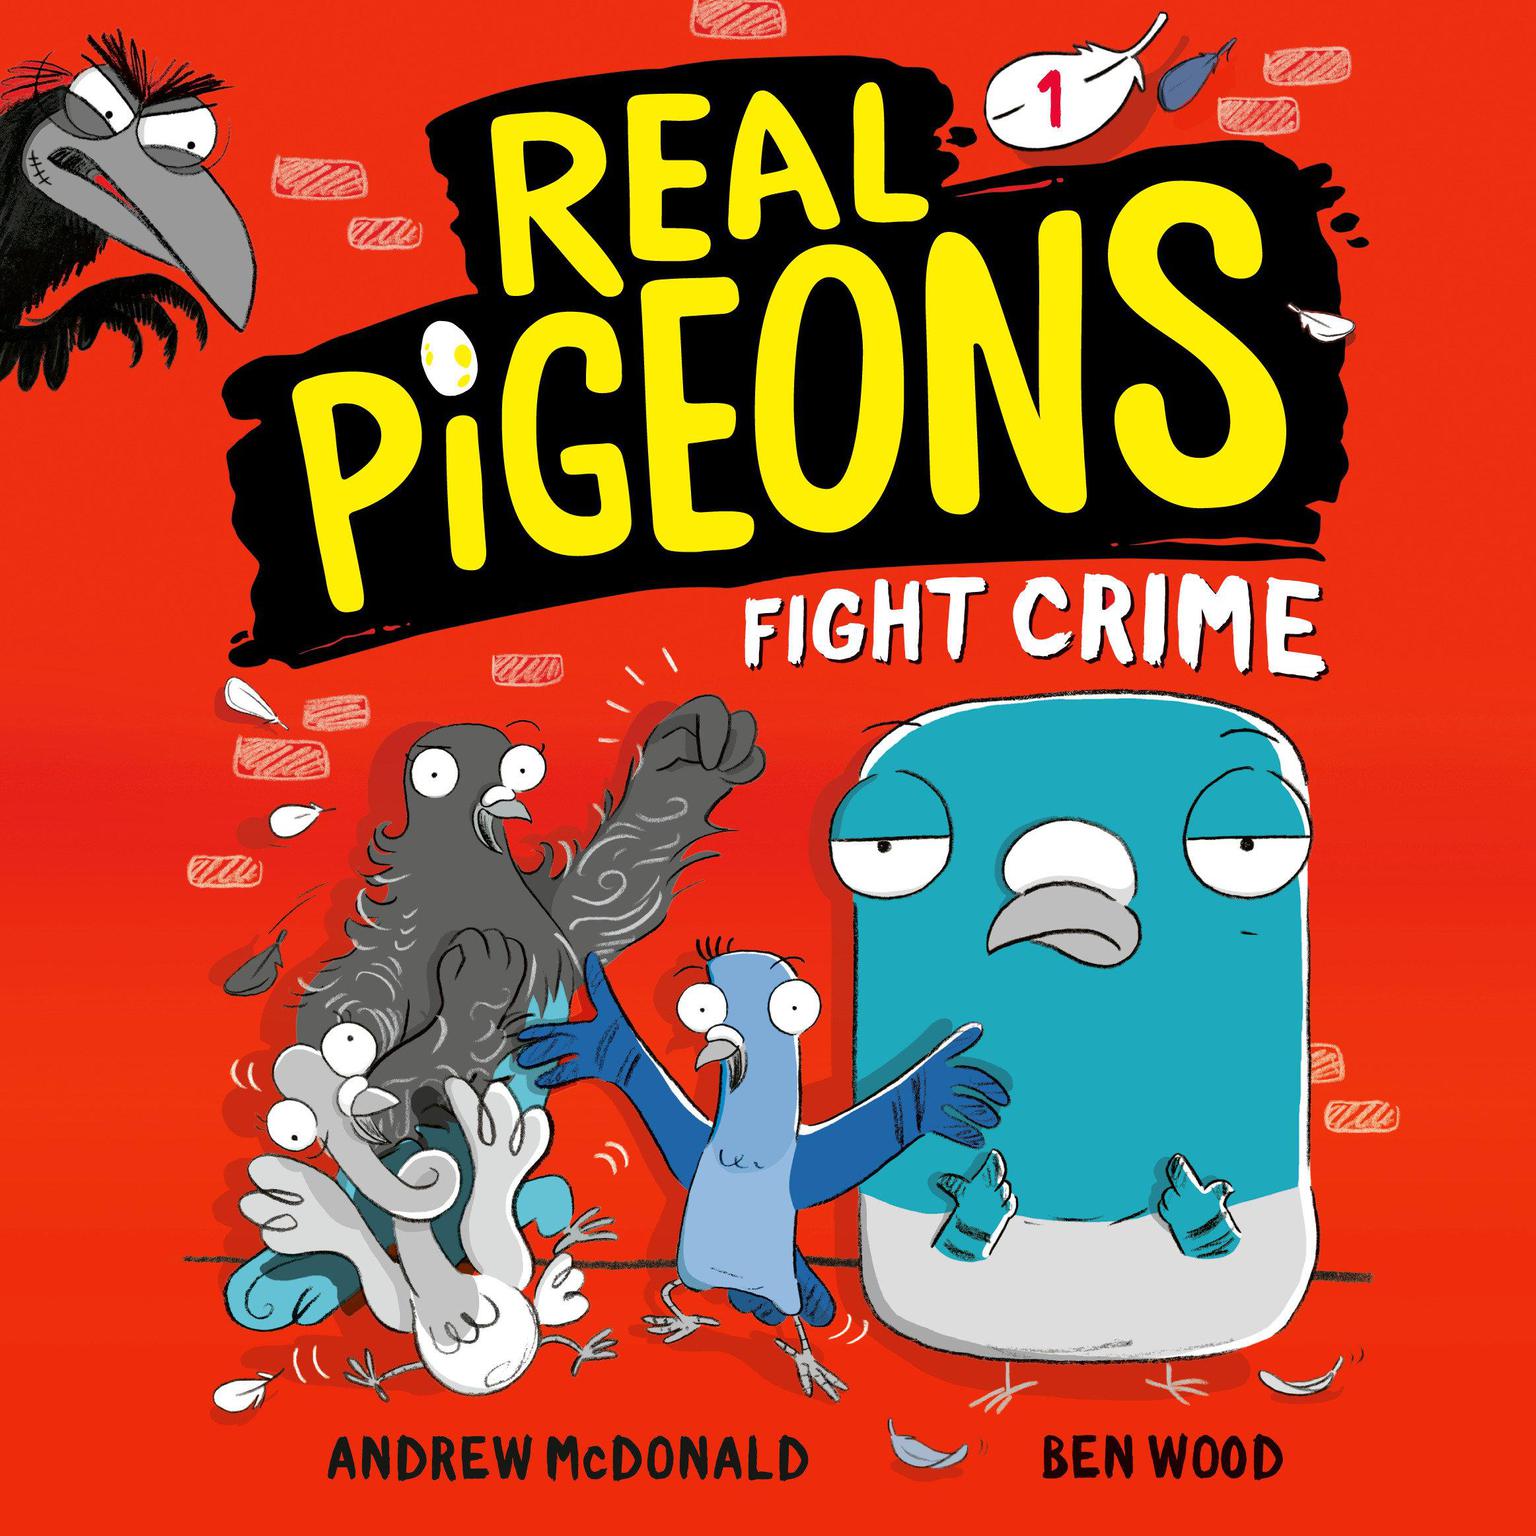 Real Pigeons Fight Crime (Book 1) Audiobook, by Andrew McDonald